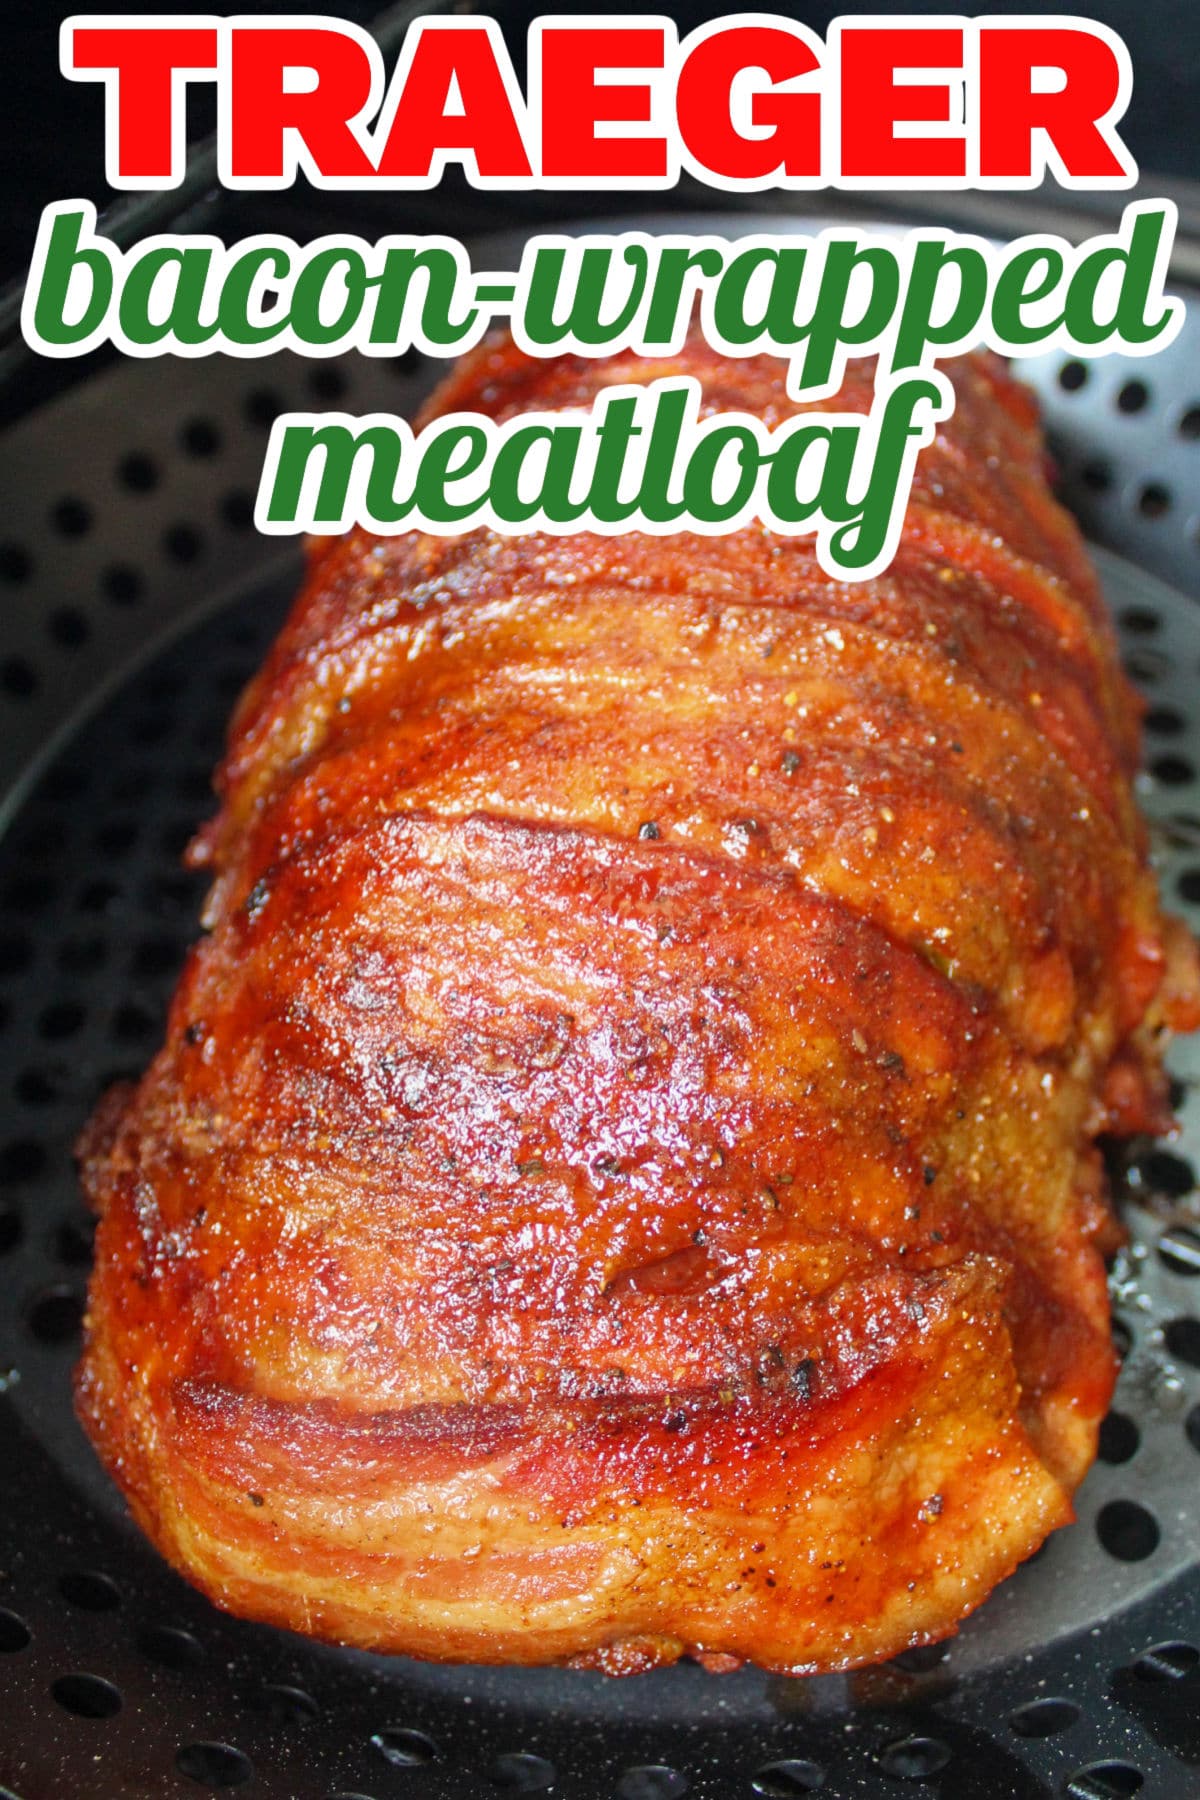 This Traeger Smoked Bacon-Wrapped Meatloaf is not your mommas meatloaf! It's juicy, smoky and there's no ketchup in sight! As with most things on smoker - set aside a couple of hours to make this - but it will be worth it!  via @foodhussy